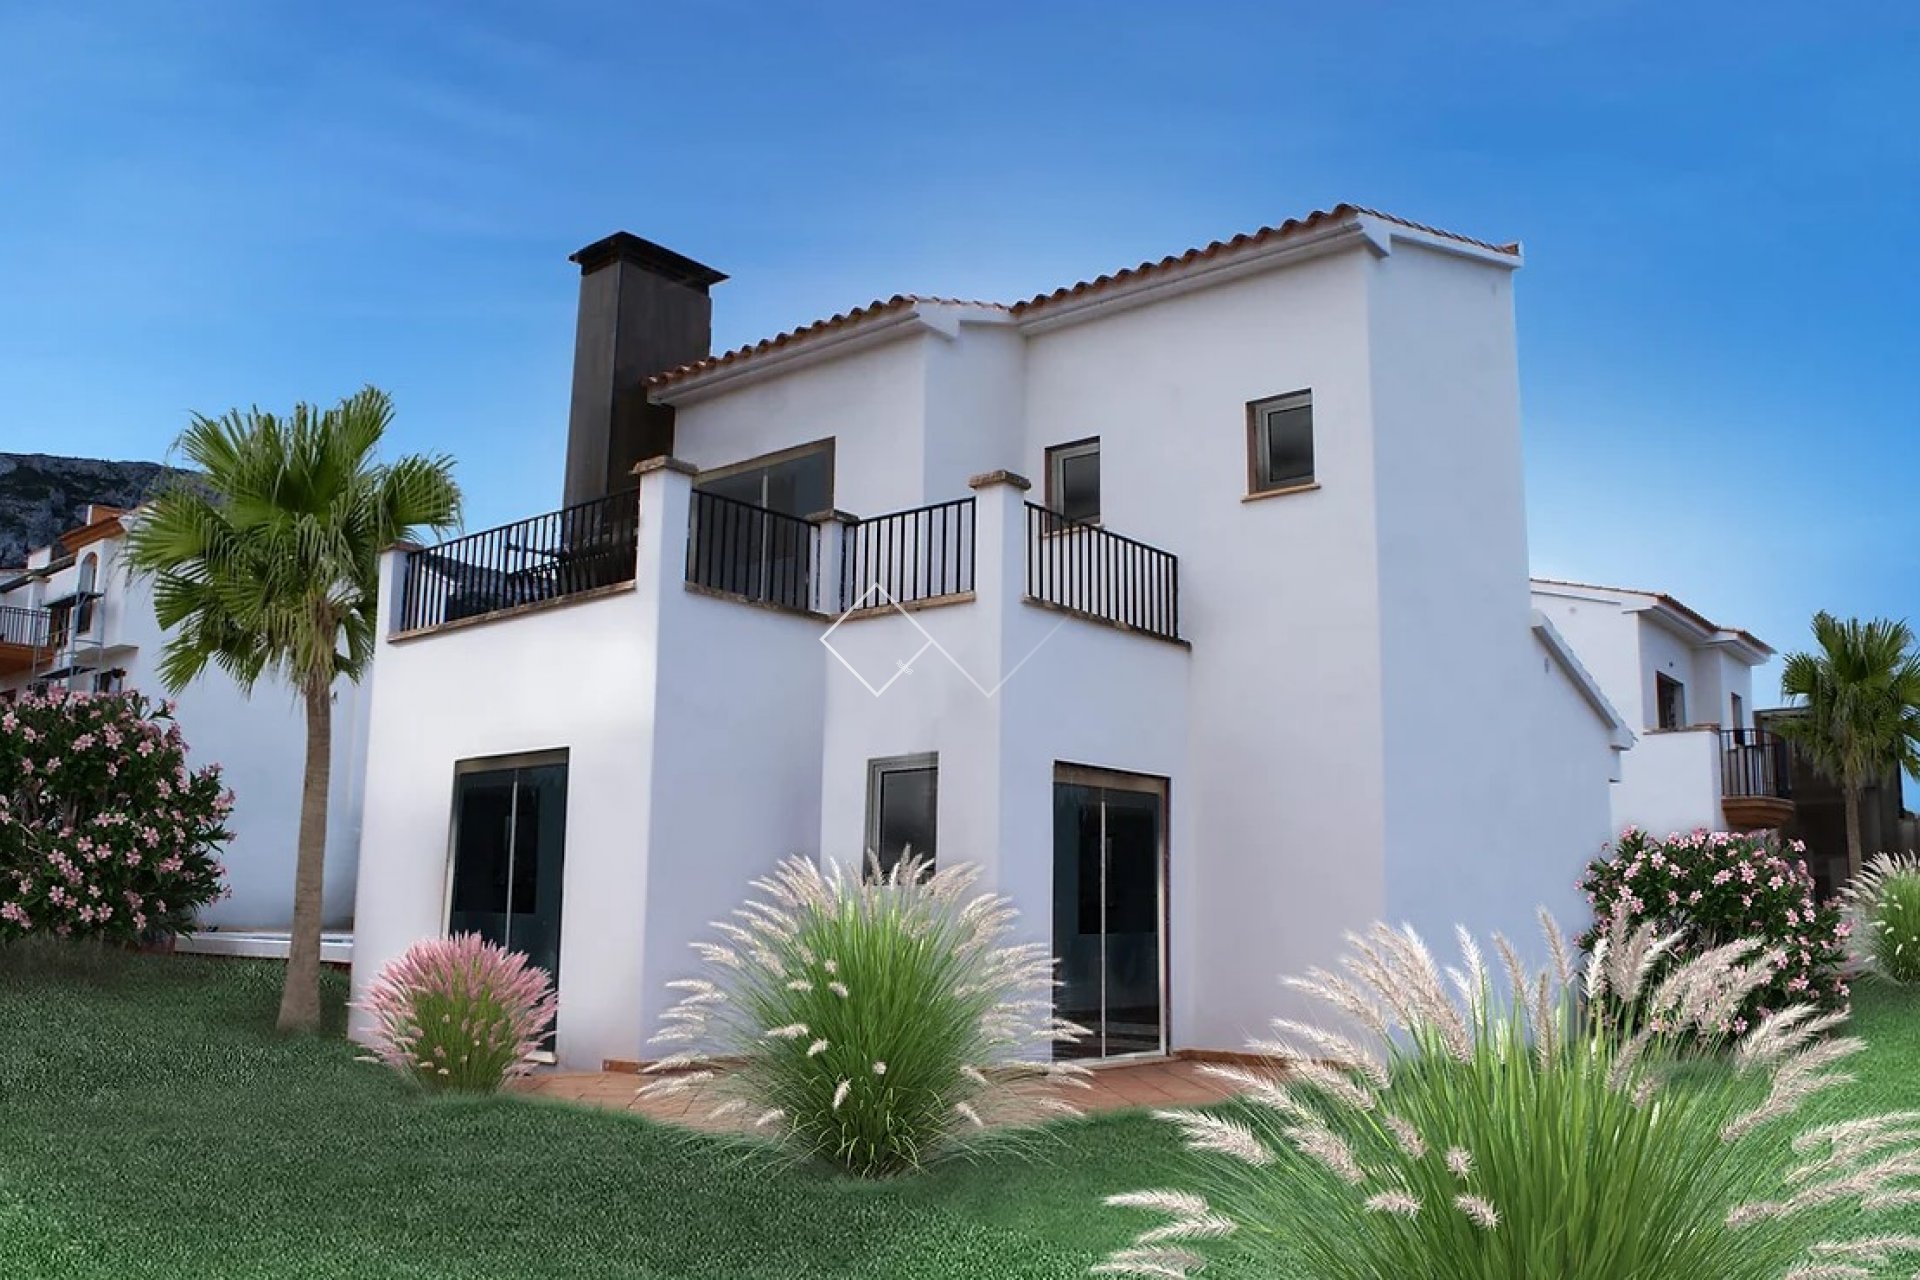 Affordable detached villas for sale in a central location in Denia